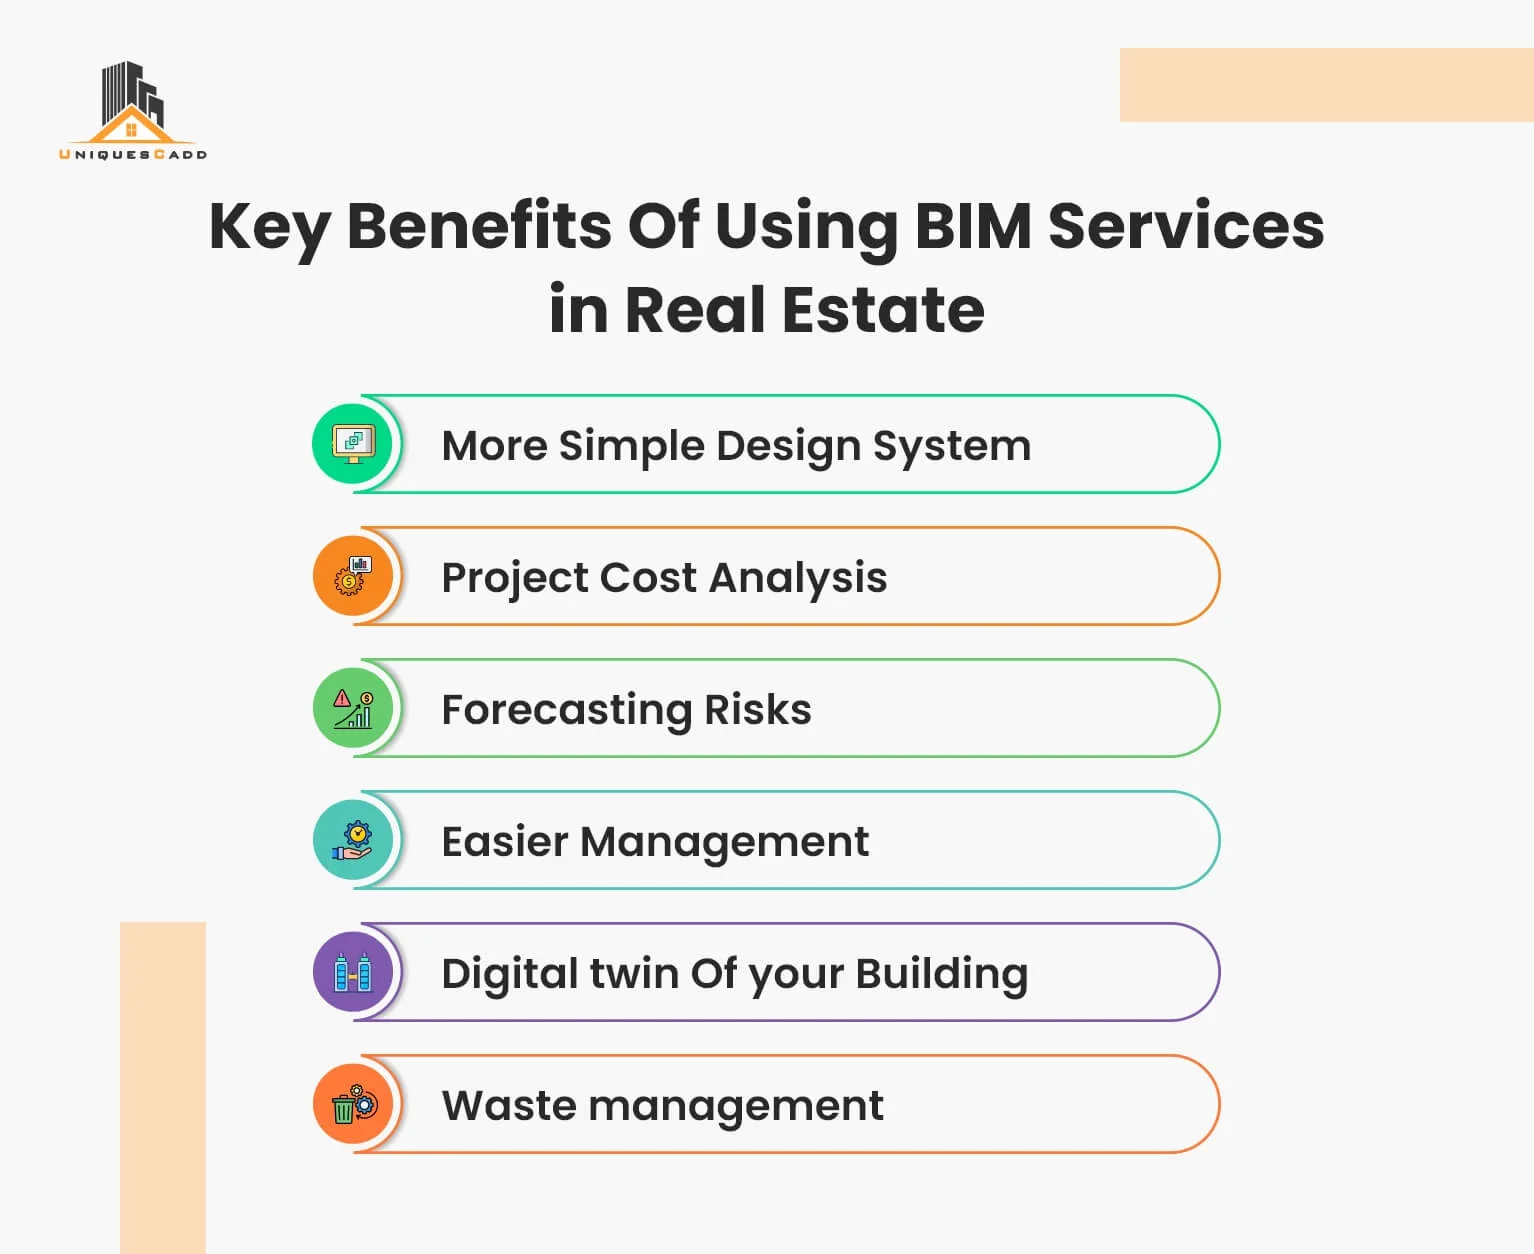 Key Benefits Of Using BIM Services in Real Estate